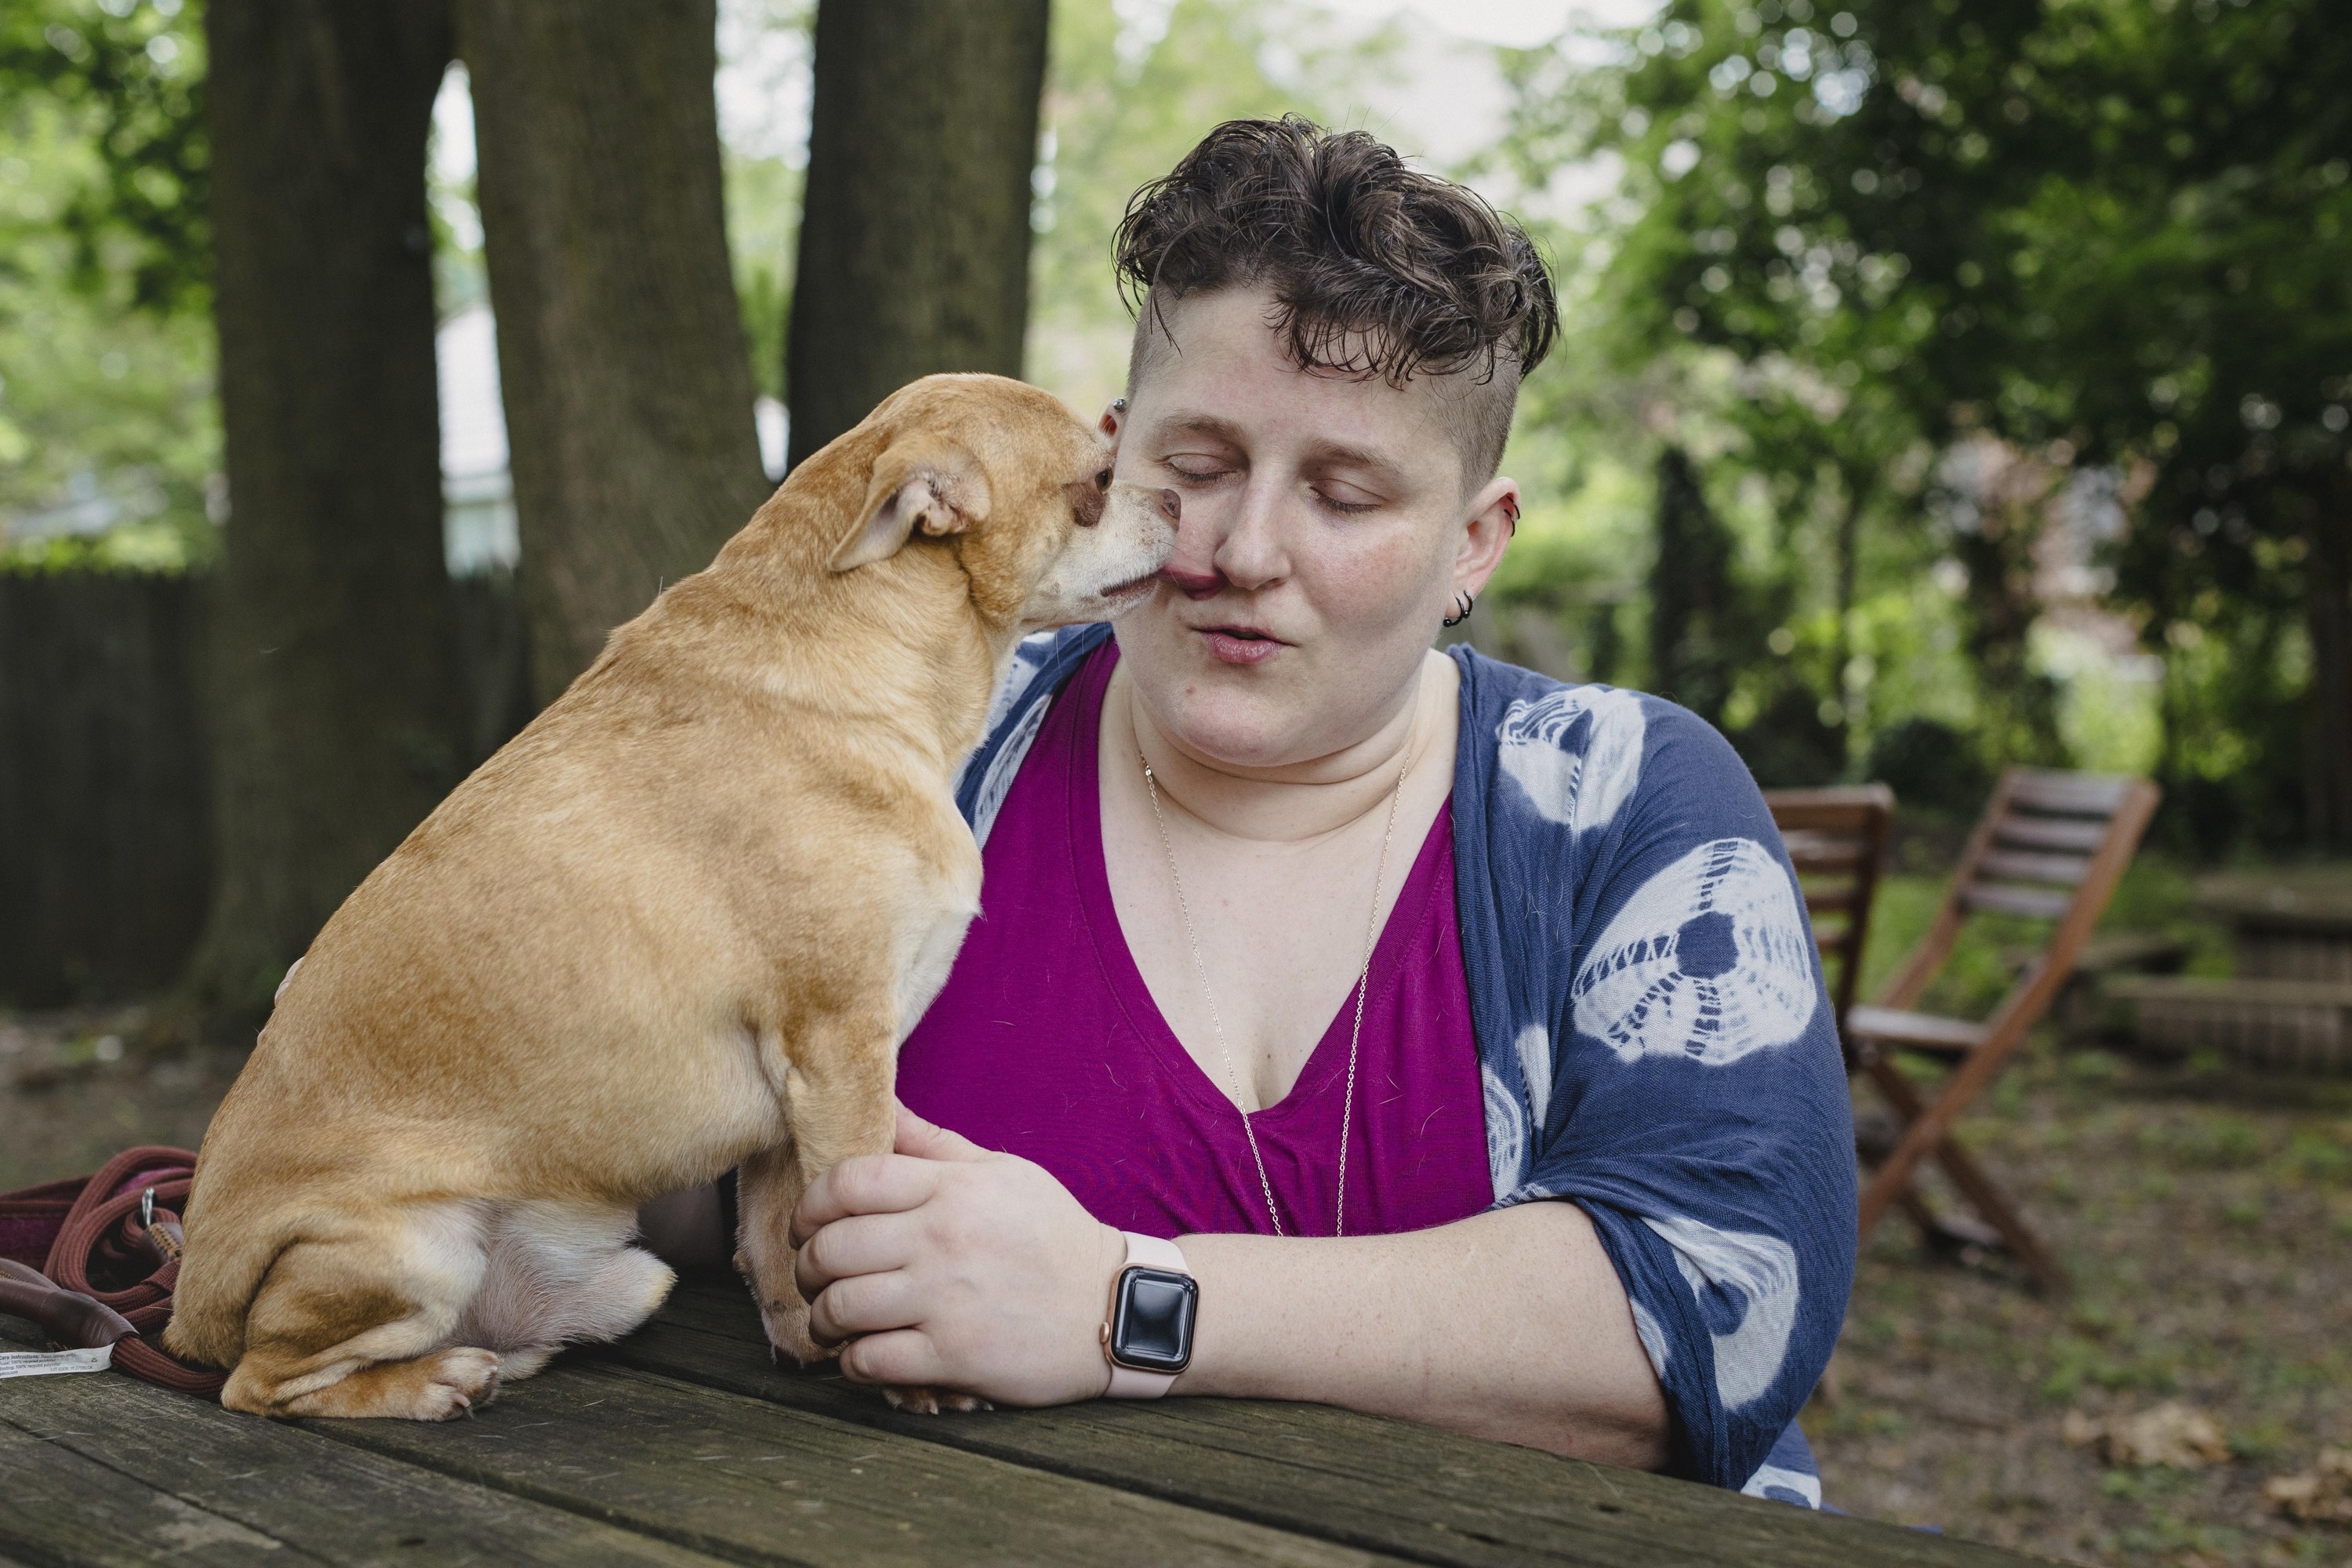 A Chihuahua licks the face of a woman seated at a picnic table